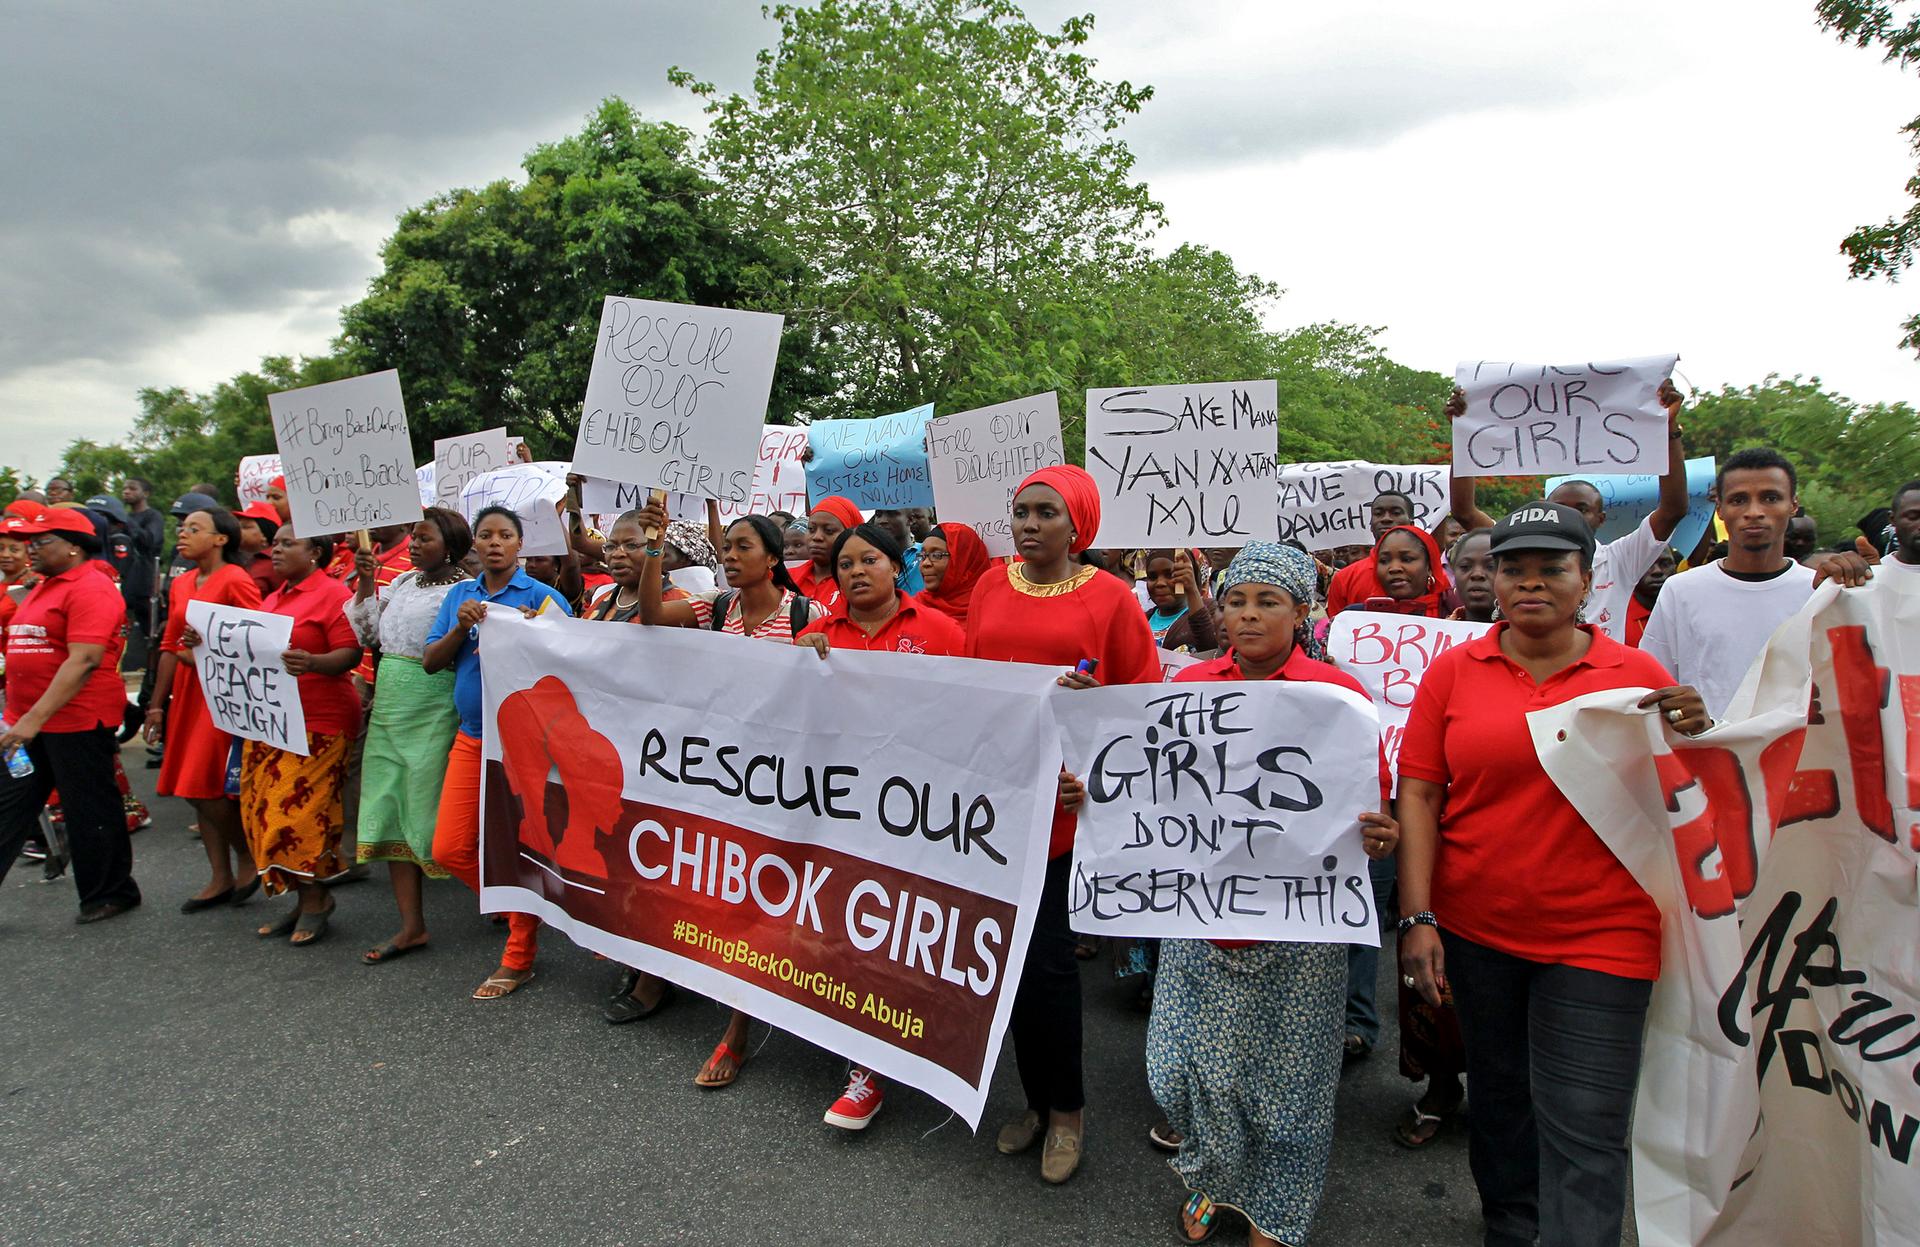 Members of various civil society organizations (CSOs) protest against the delay in securing the release of the abducted schoolgirls who were kidnapped. Dozens of protesters gathered outside Nigeria's parliament in Abuja on Wednesday called on security for